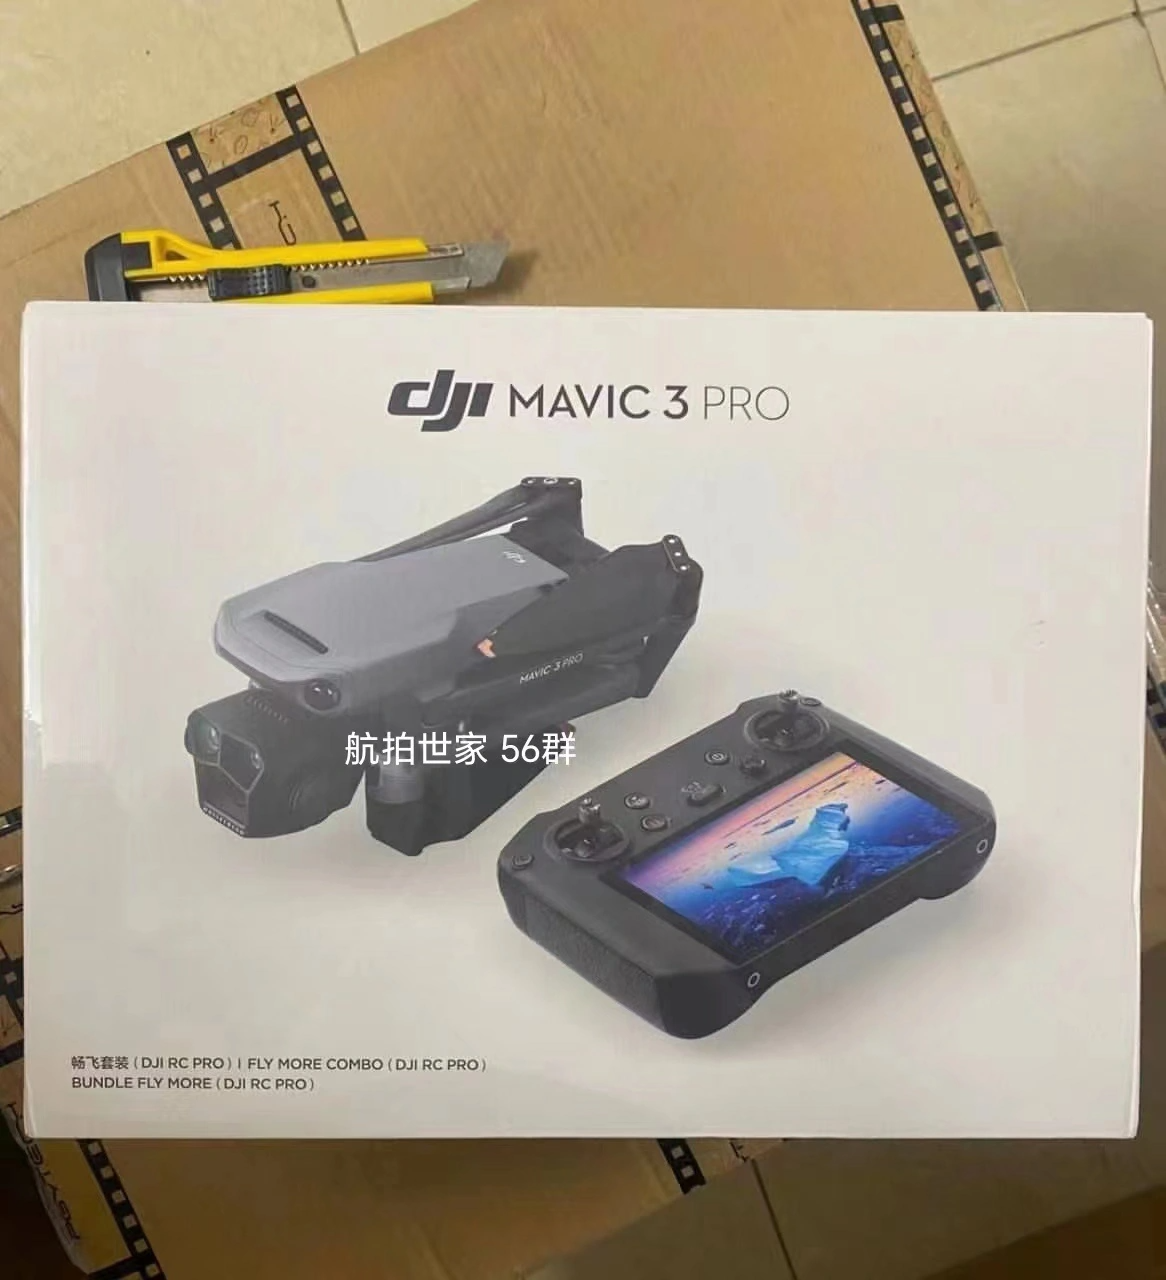 DJI Mavic 3 Pro is already on sale in China.  Photos and details